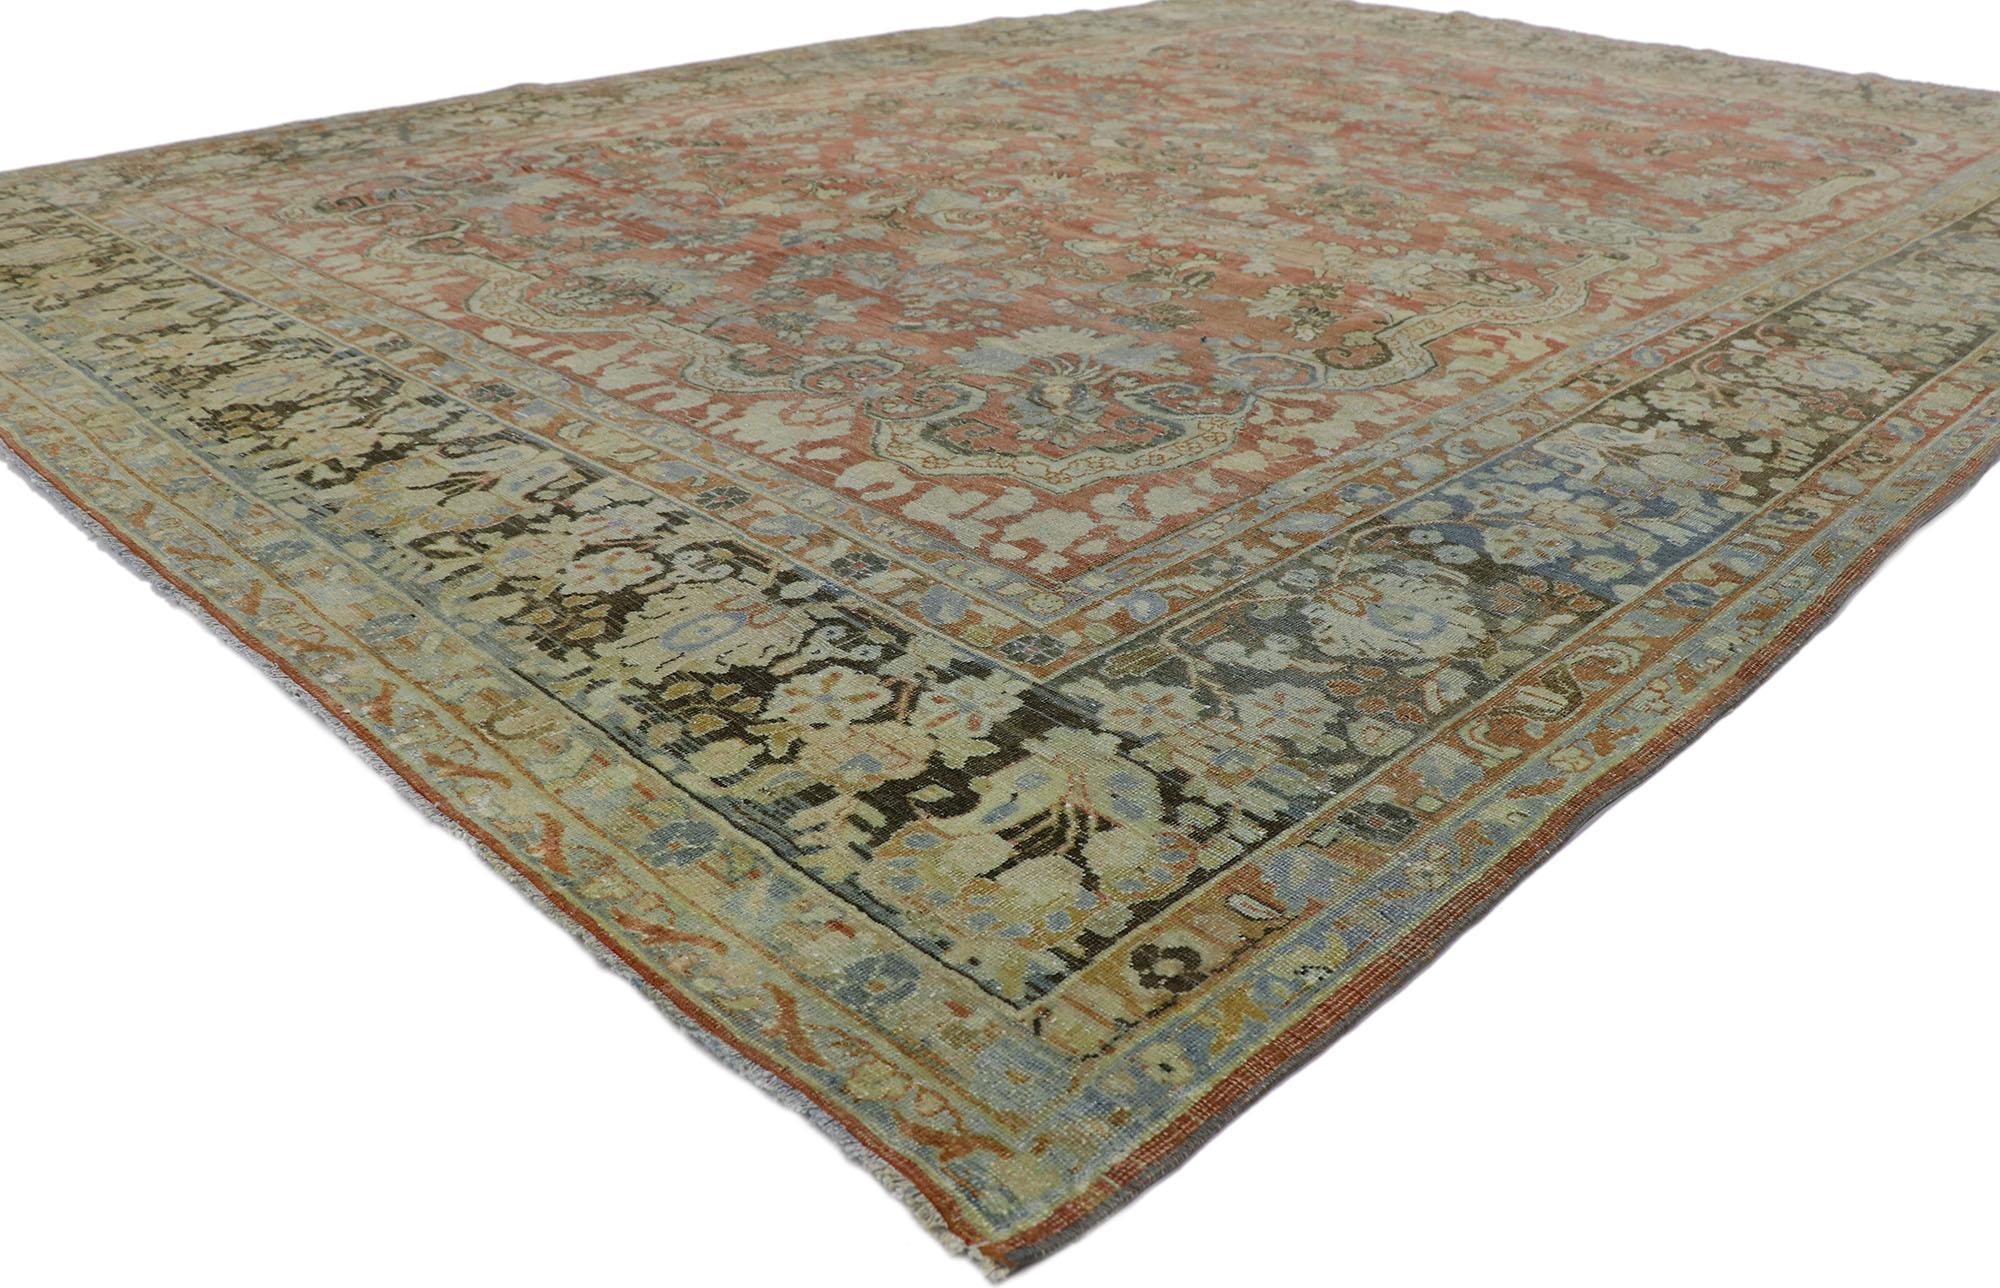 53629 Distressed Antique Persian Mahal rug with Modern Rustic Style 08'07 x 11'10. With ornate details and a lovingly time-worn composition, this hand knotted wool distressed antique Persian Mahal rug is poised to impress. The weathered brick red